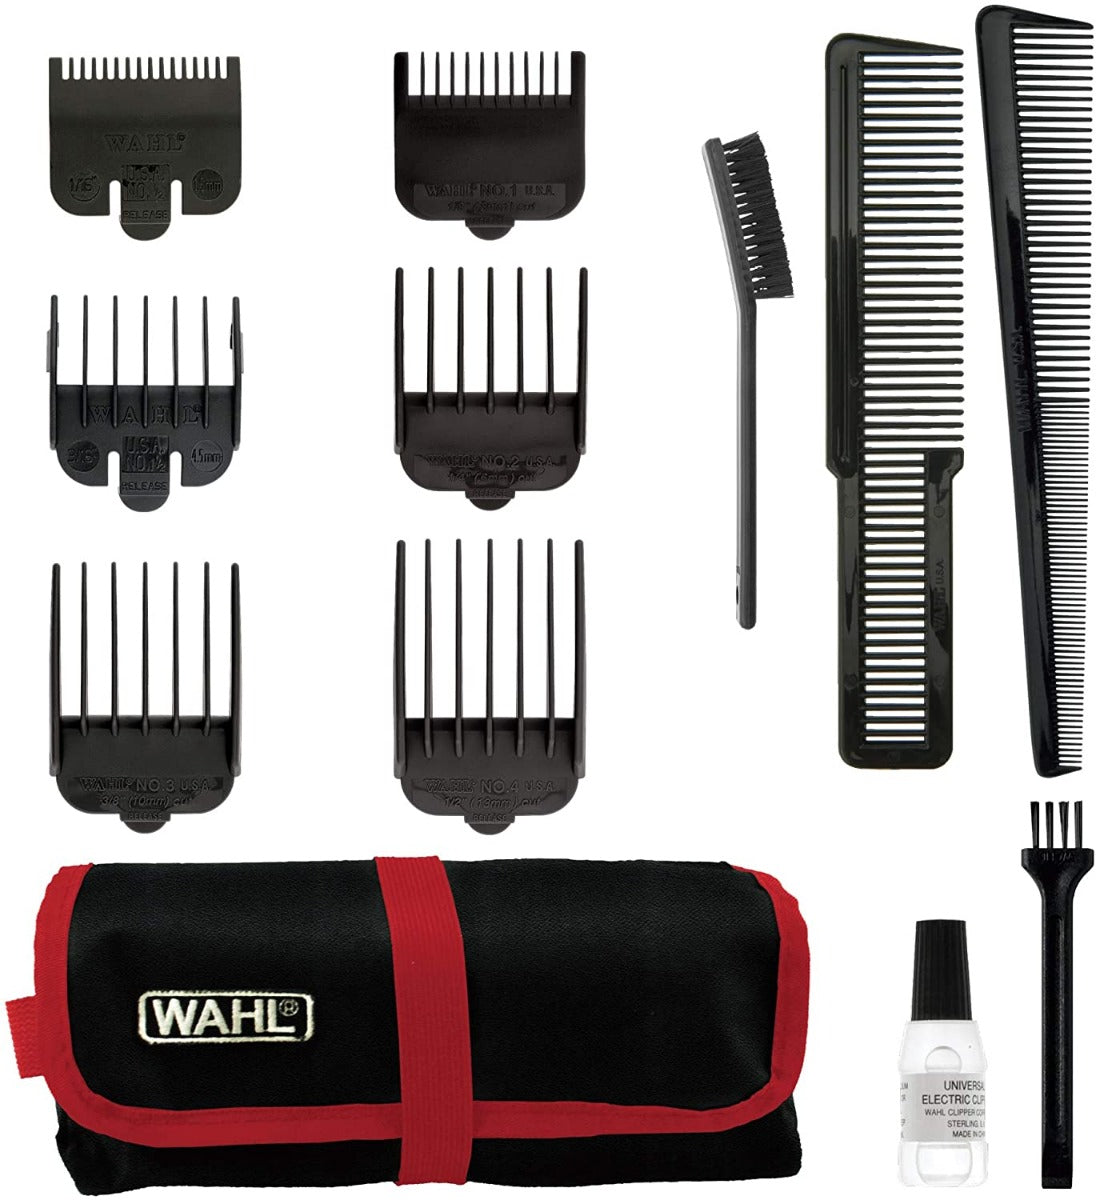 Wahl Hair Clippers For Men - Baldfader Plus Afro Head Shaver